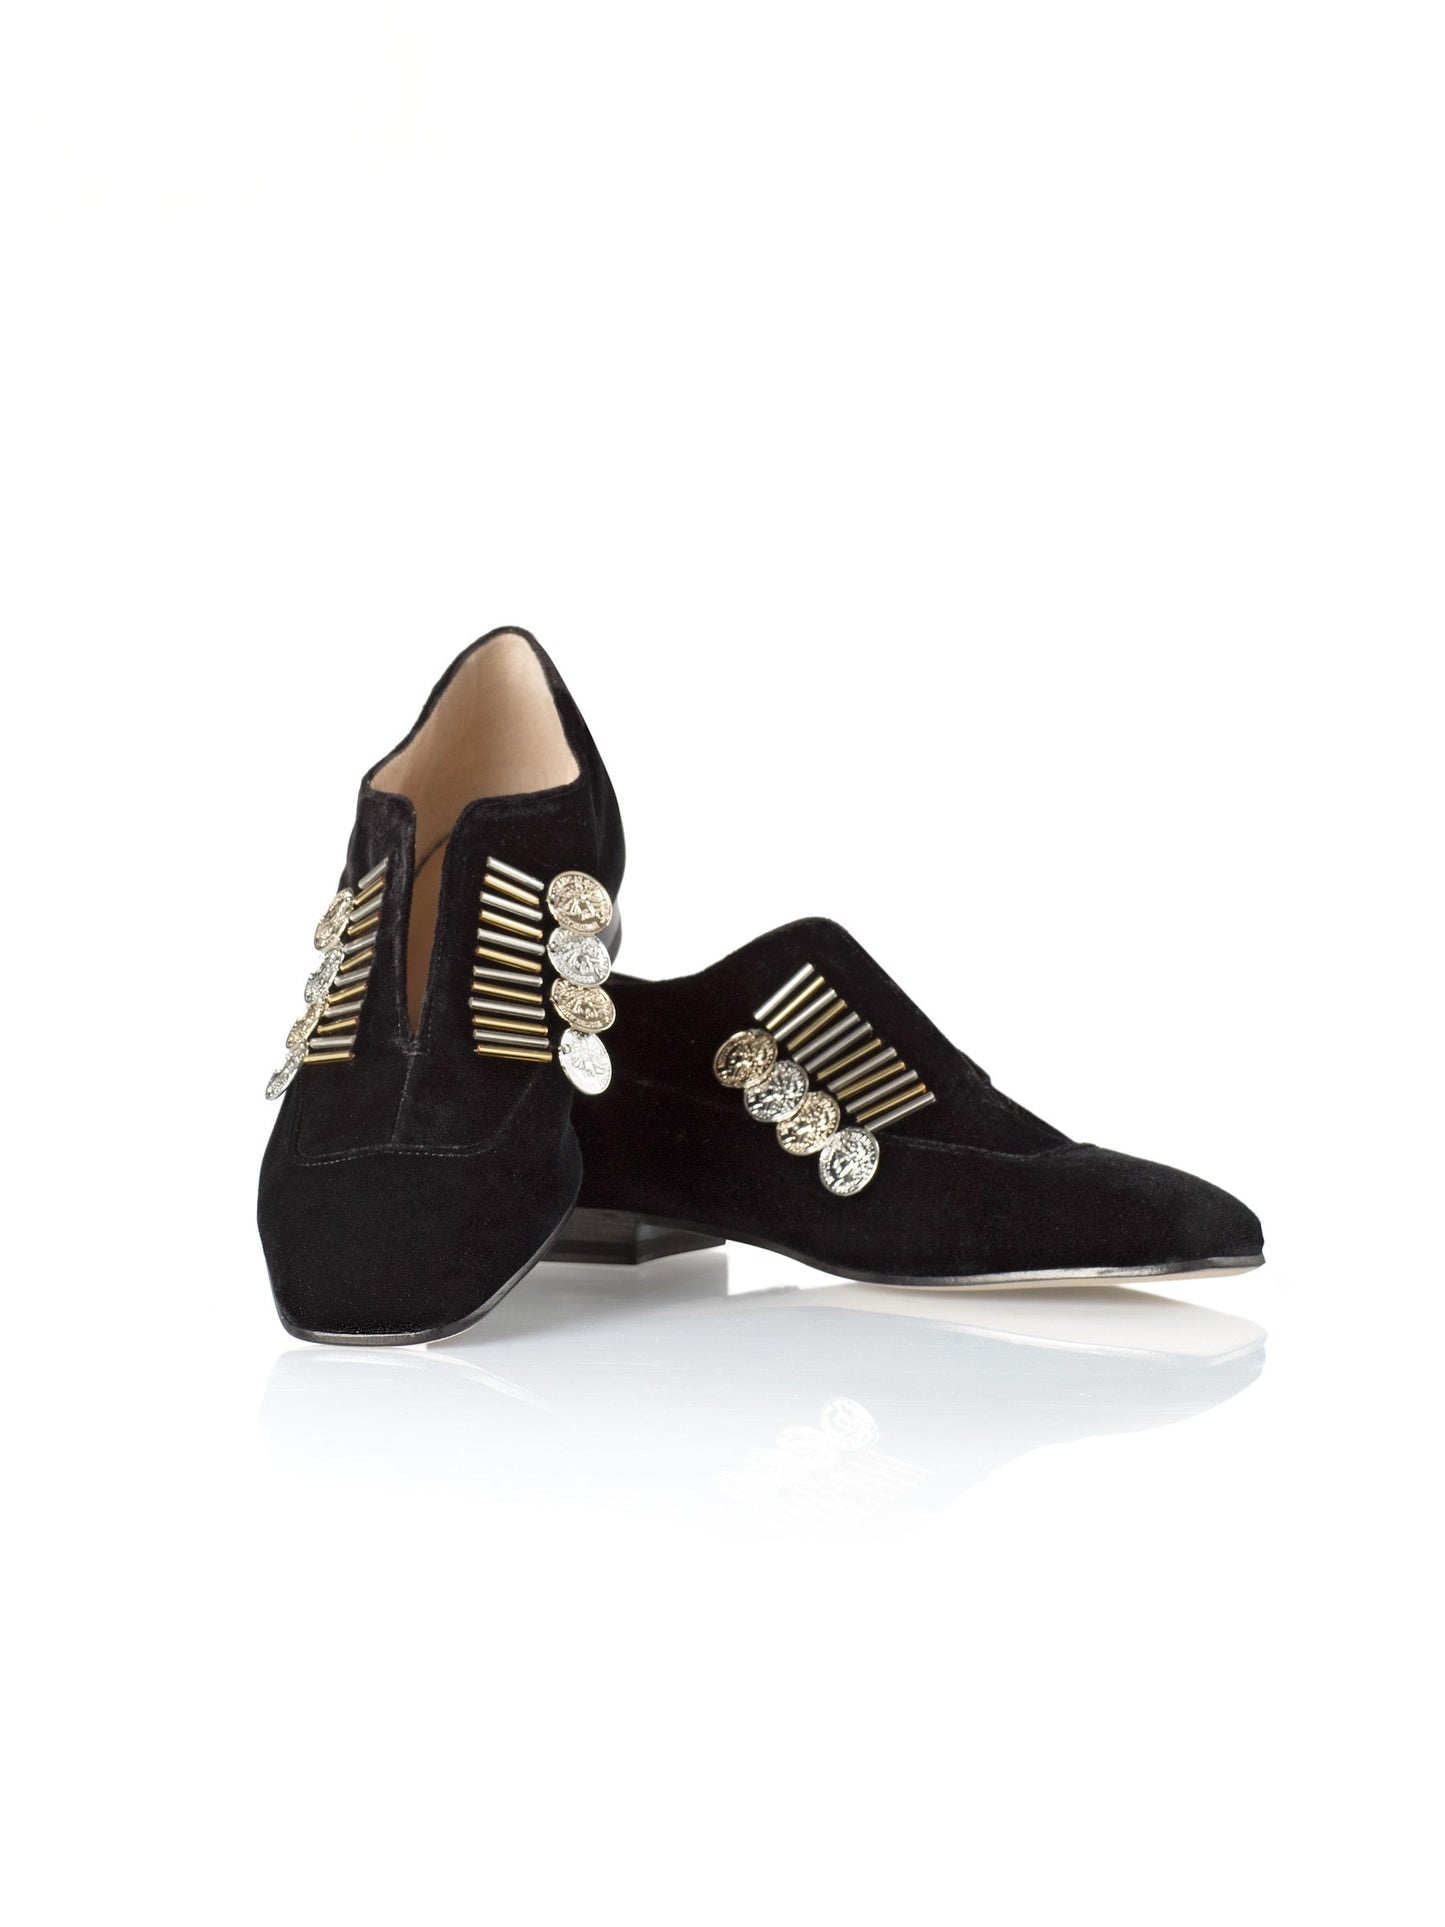 Traviata Flat in black with gold and silver accessory